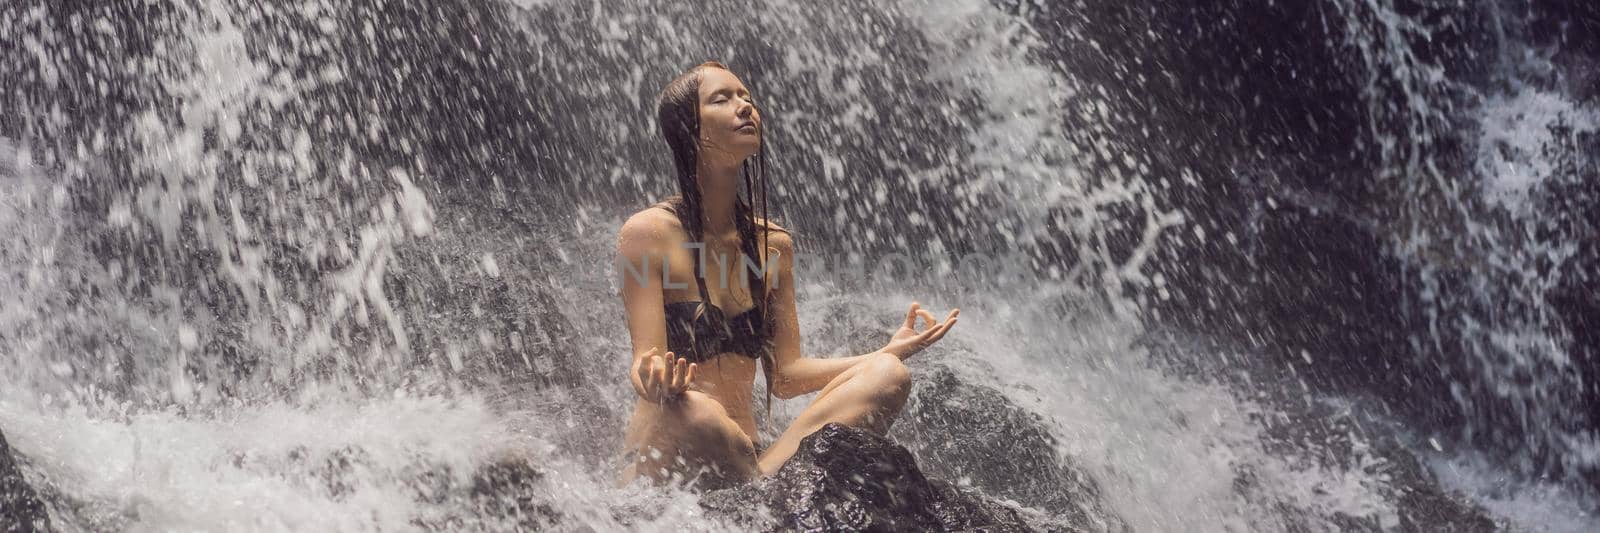 Wellness spa, vacation and yoga meditation concept. Young woman sitting in lotus position on the rock in tropical waterfall BANNER, LONG FORMAT by galitskaya